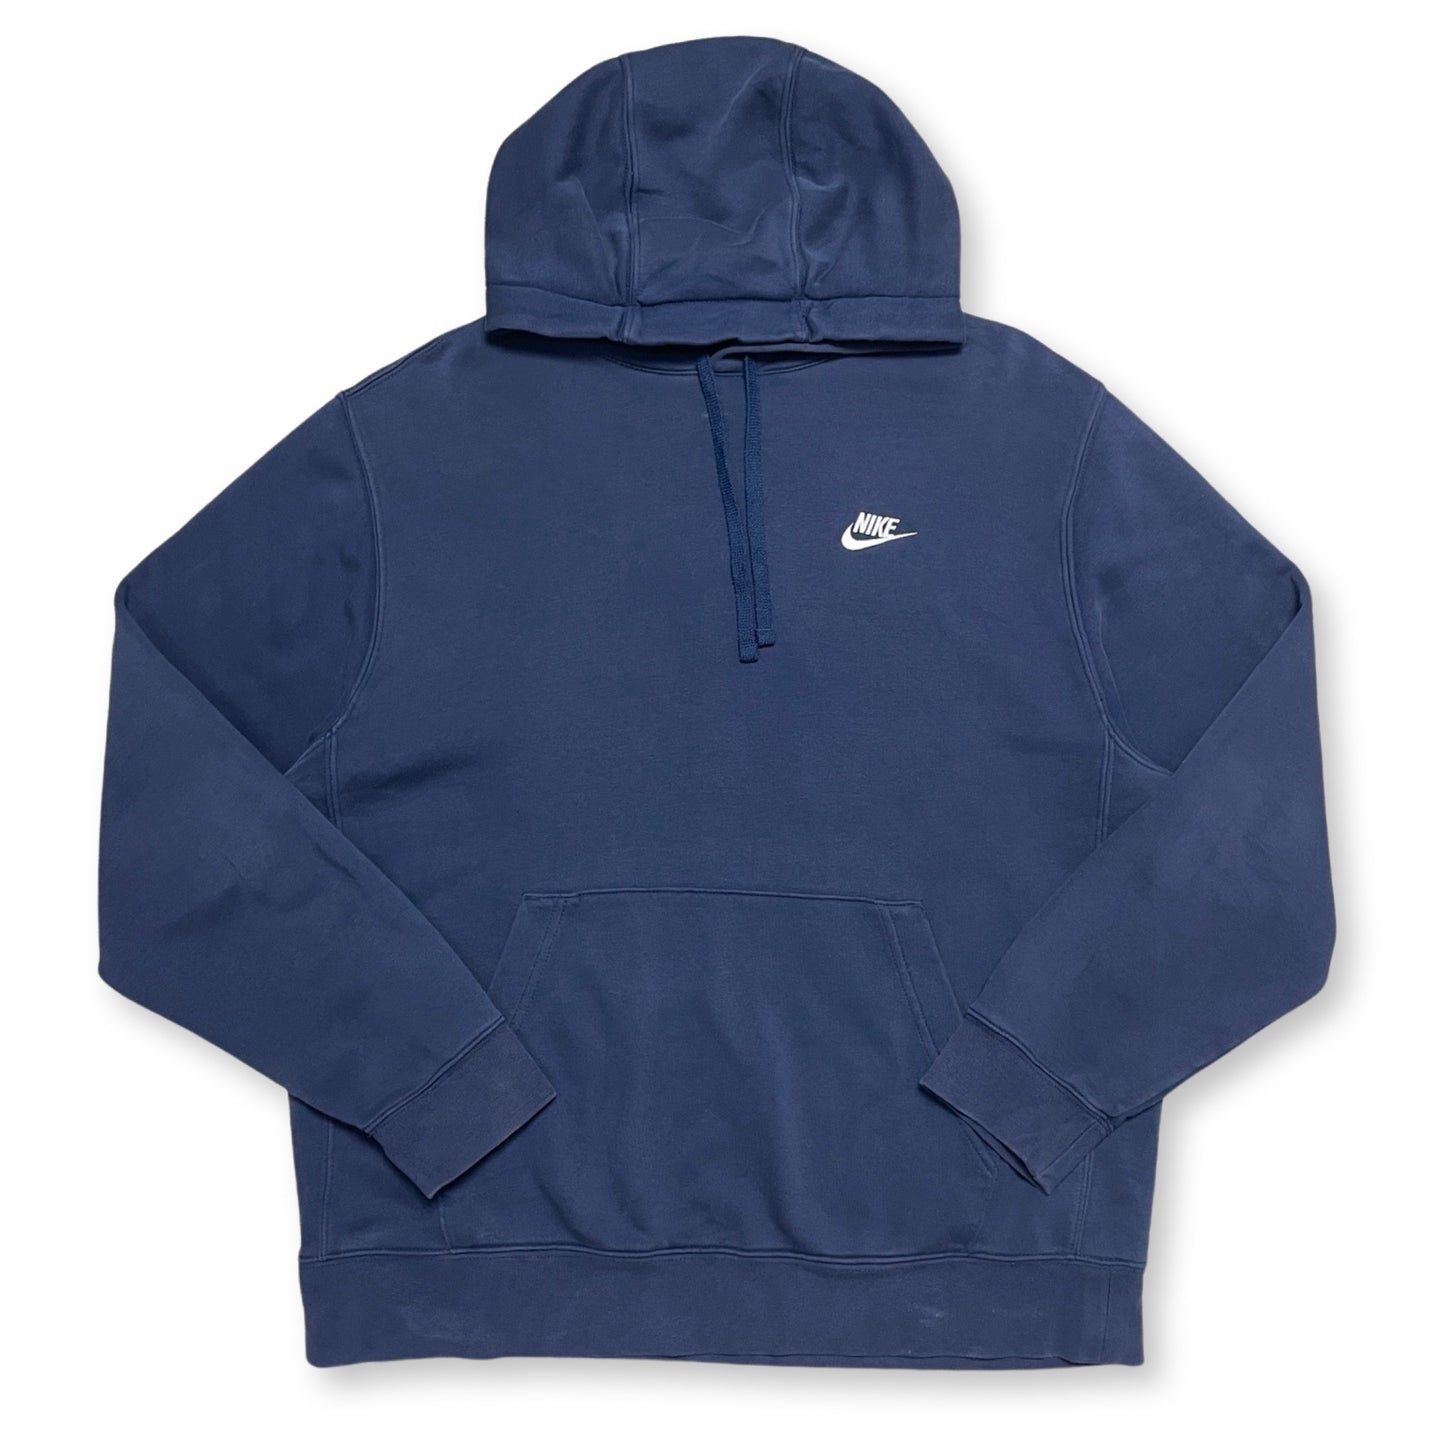 Nike Embroidered Hoodie (Large/XL)